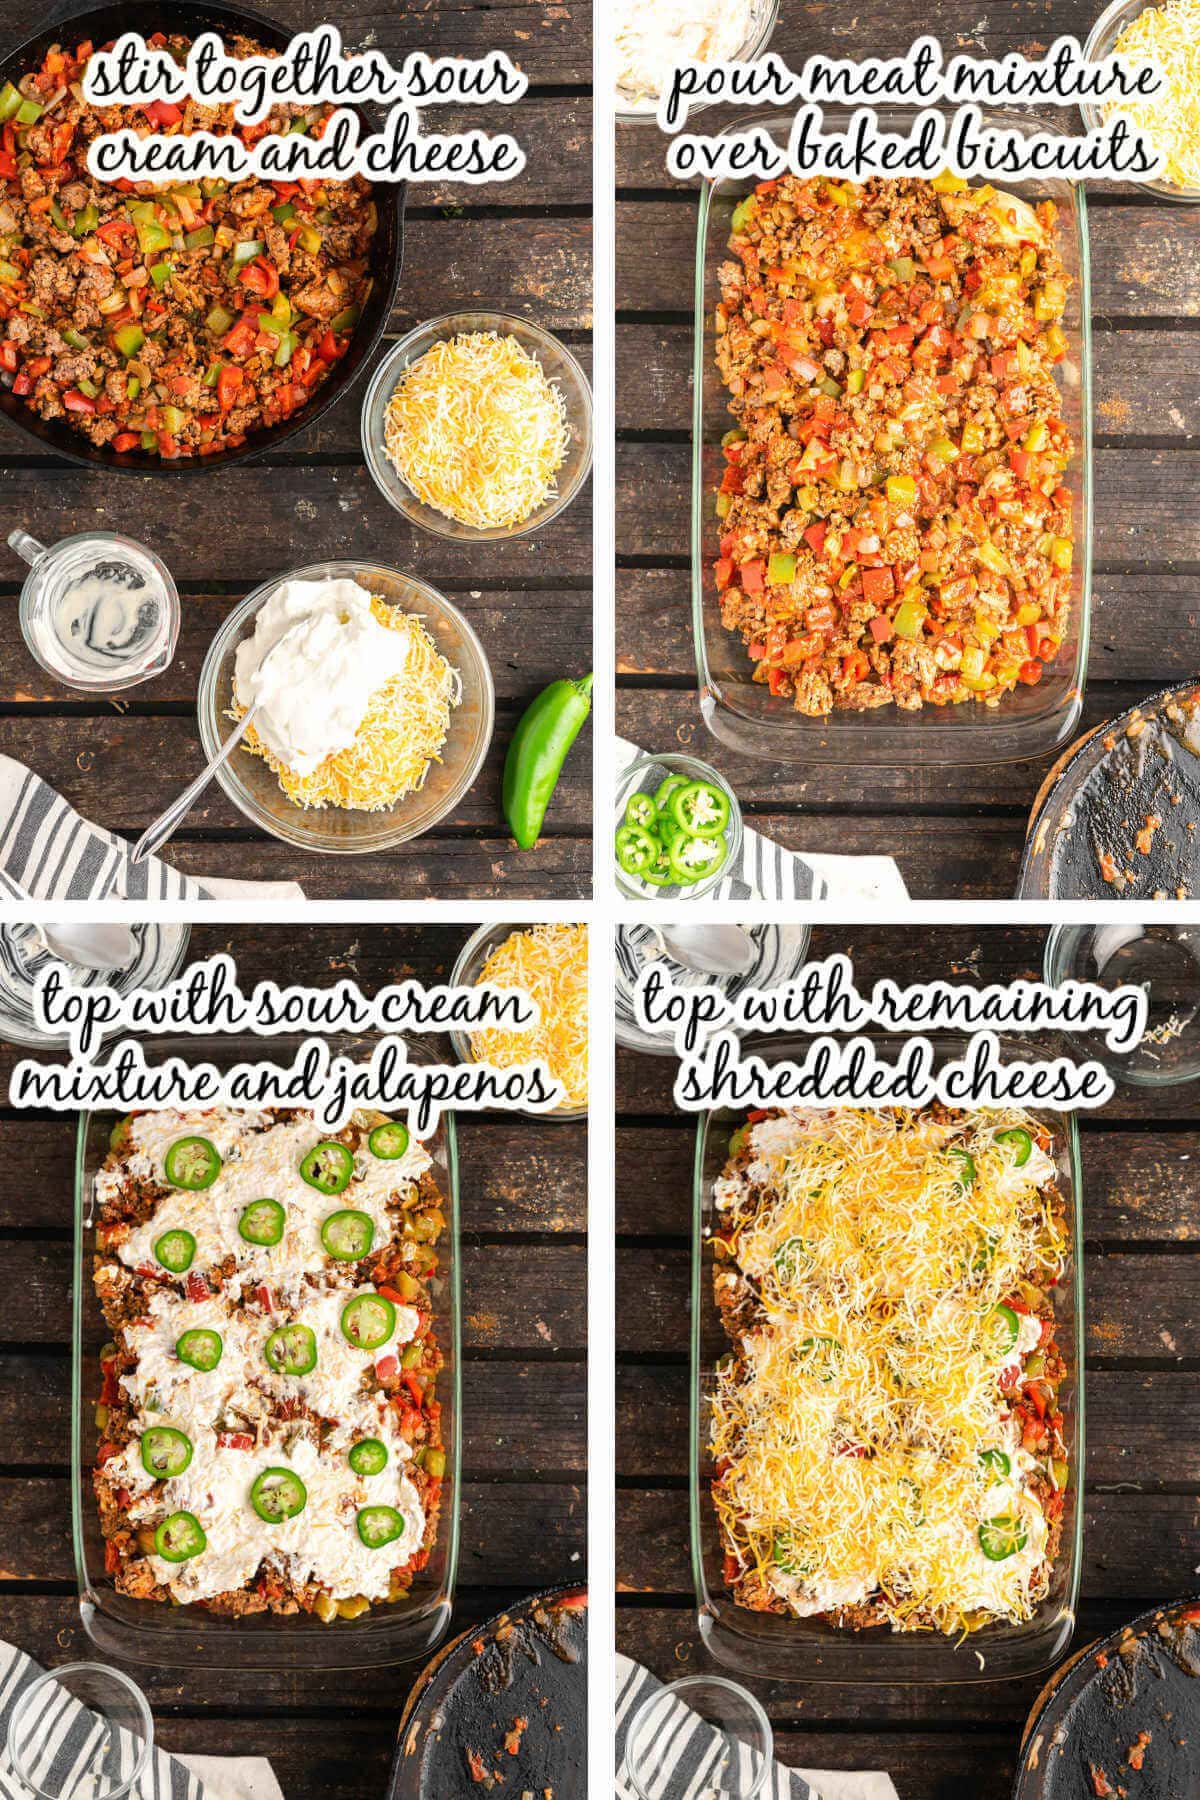 Collage of photos showing how to top casserole dish with remaining ingredients, with print overlay.